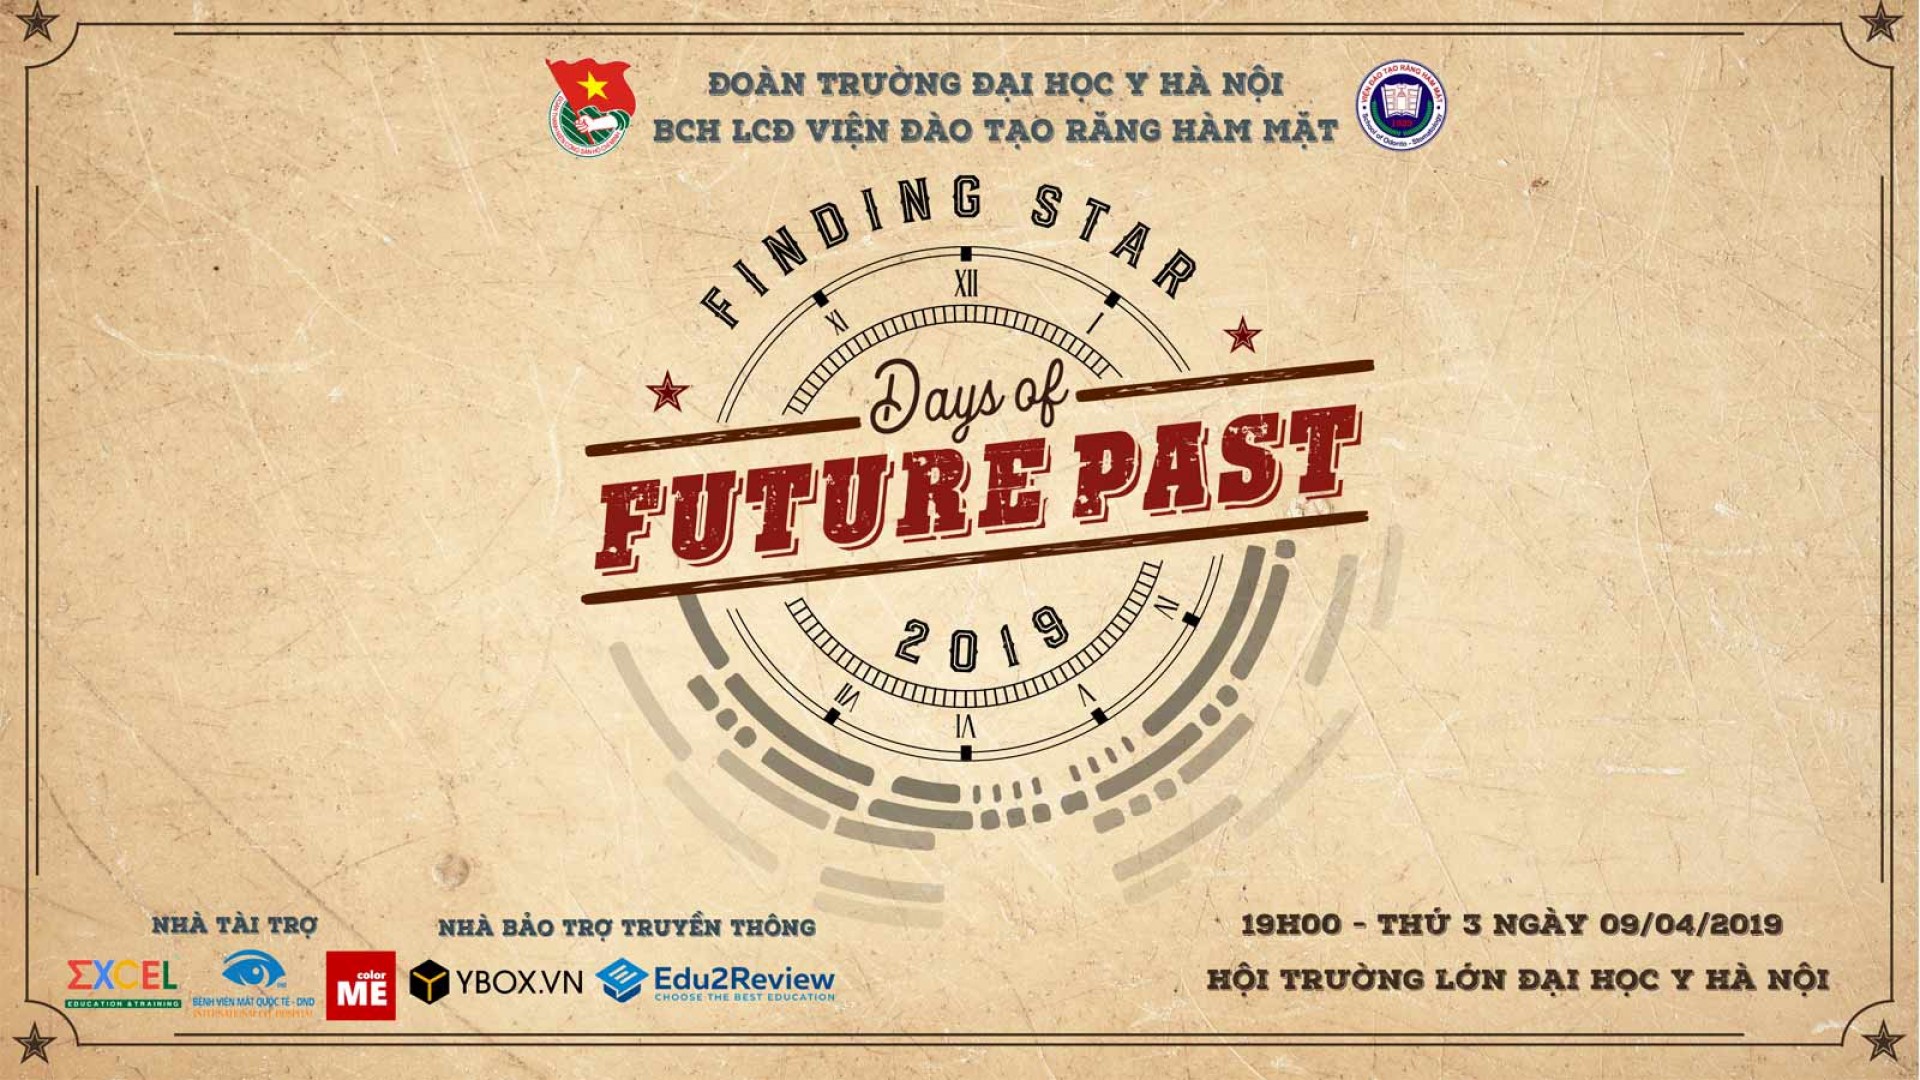 FINDING STAR 2019 - DAYS OF FUTURE PAST